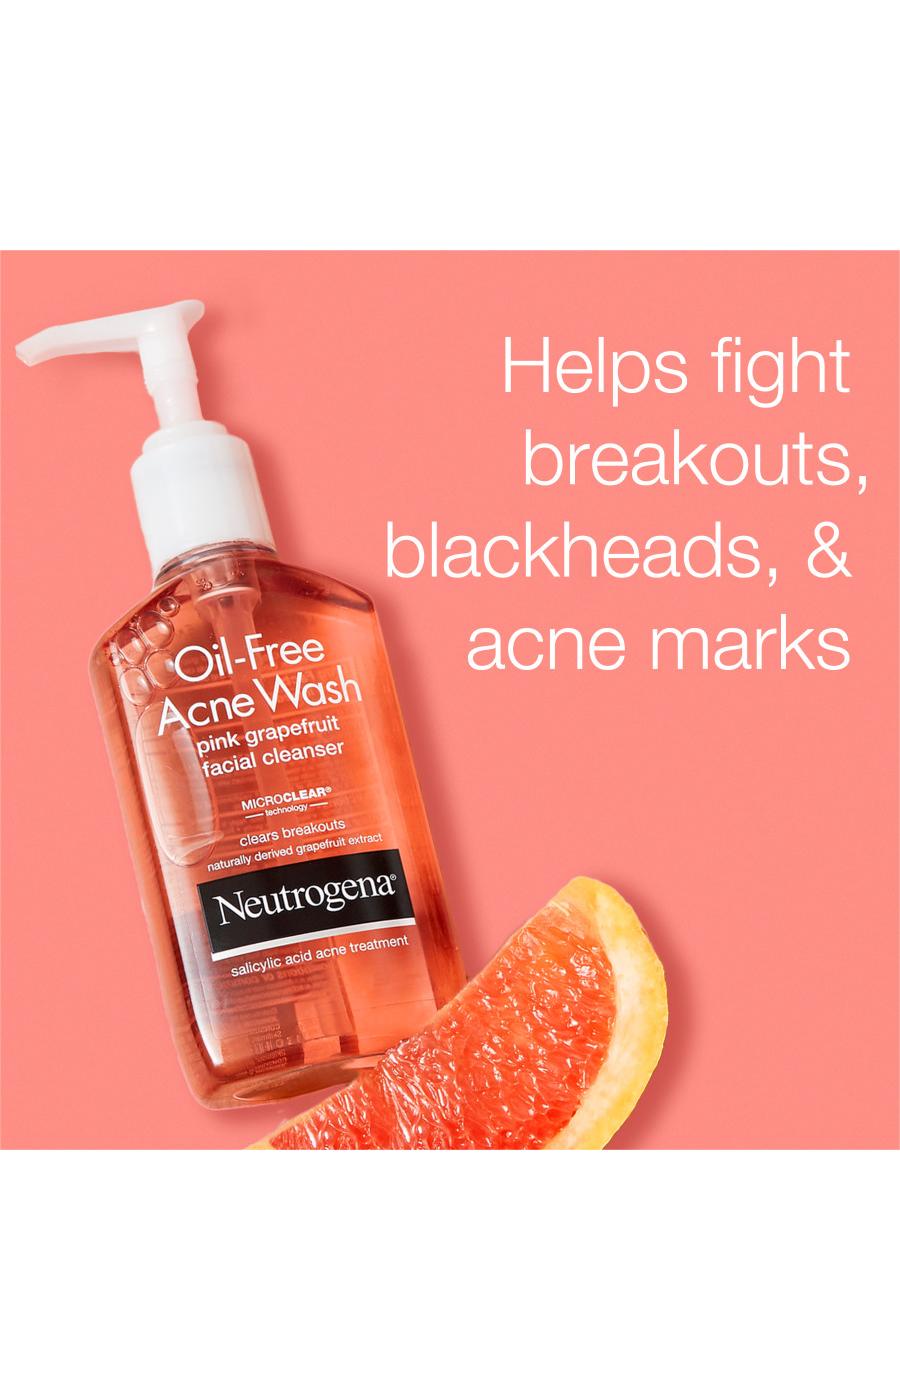 Neutrogena Oil-Free Acne Wash Pink Grapefruit Facial Cleanser; image 7 of 8